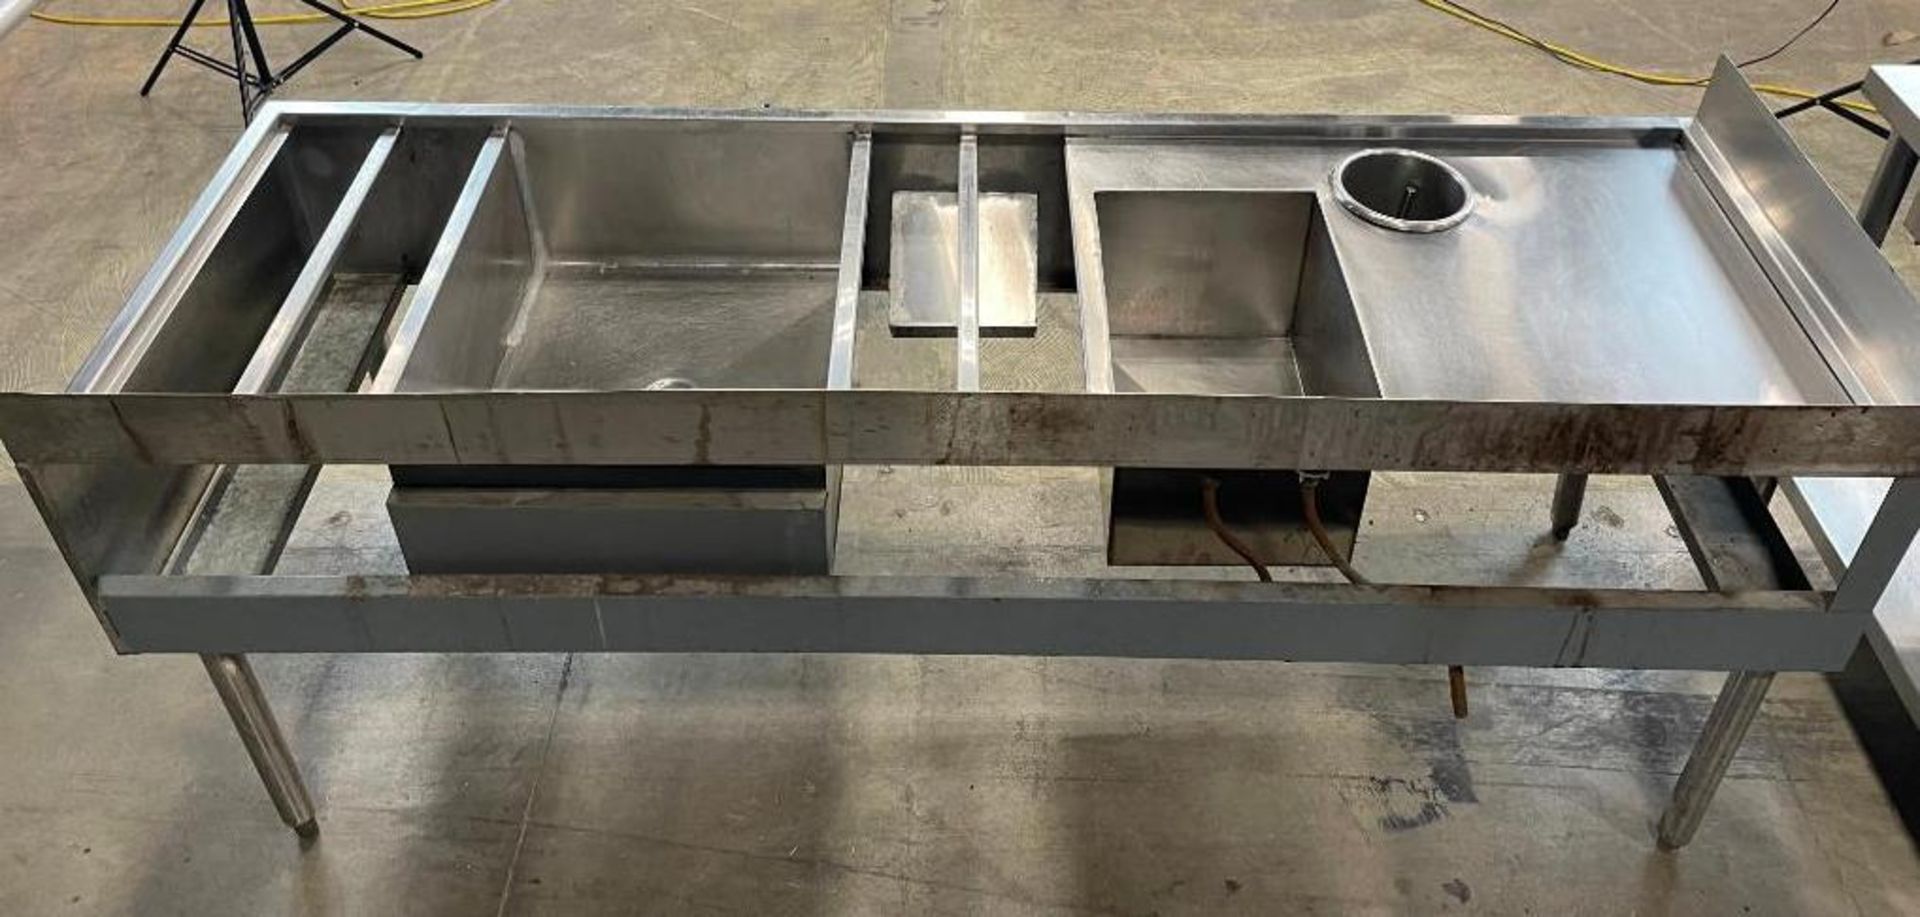 STAINLESS STEEL UNDERBAR WORKSTATION WITH ICE BIN - Image 6 of 6